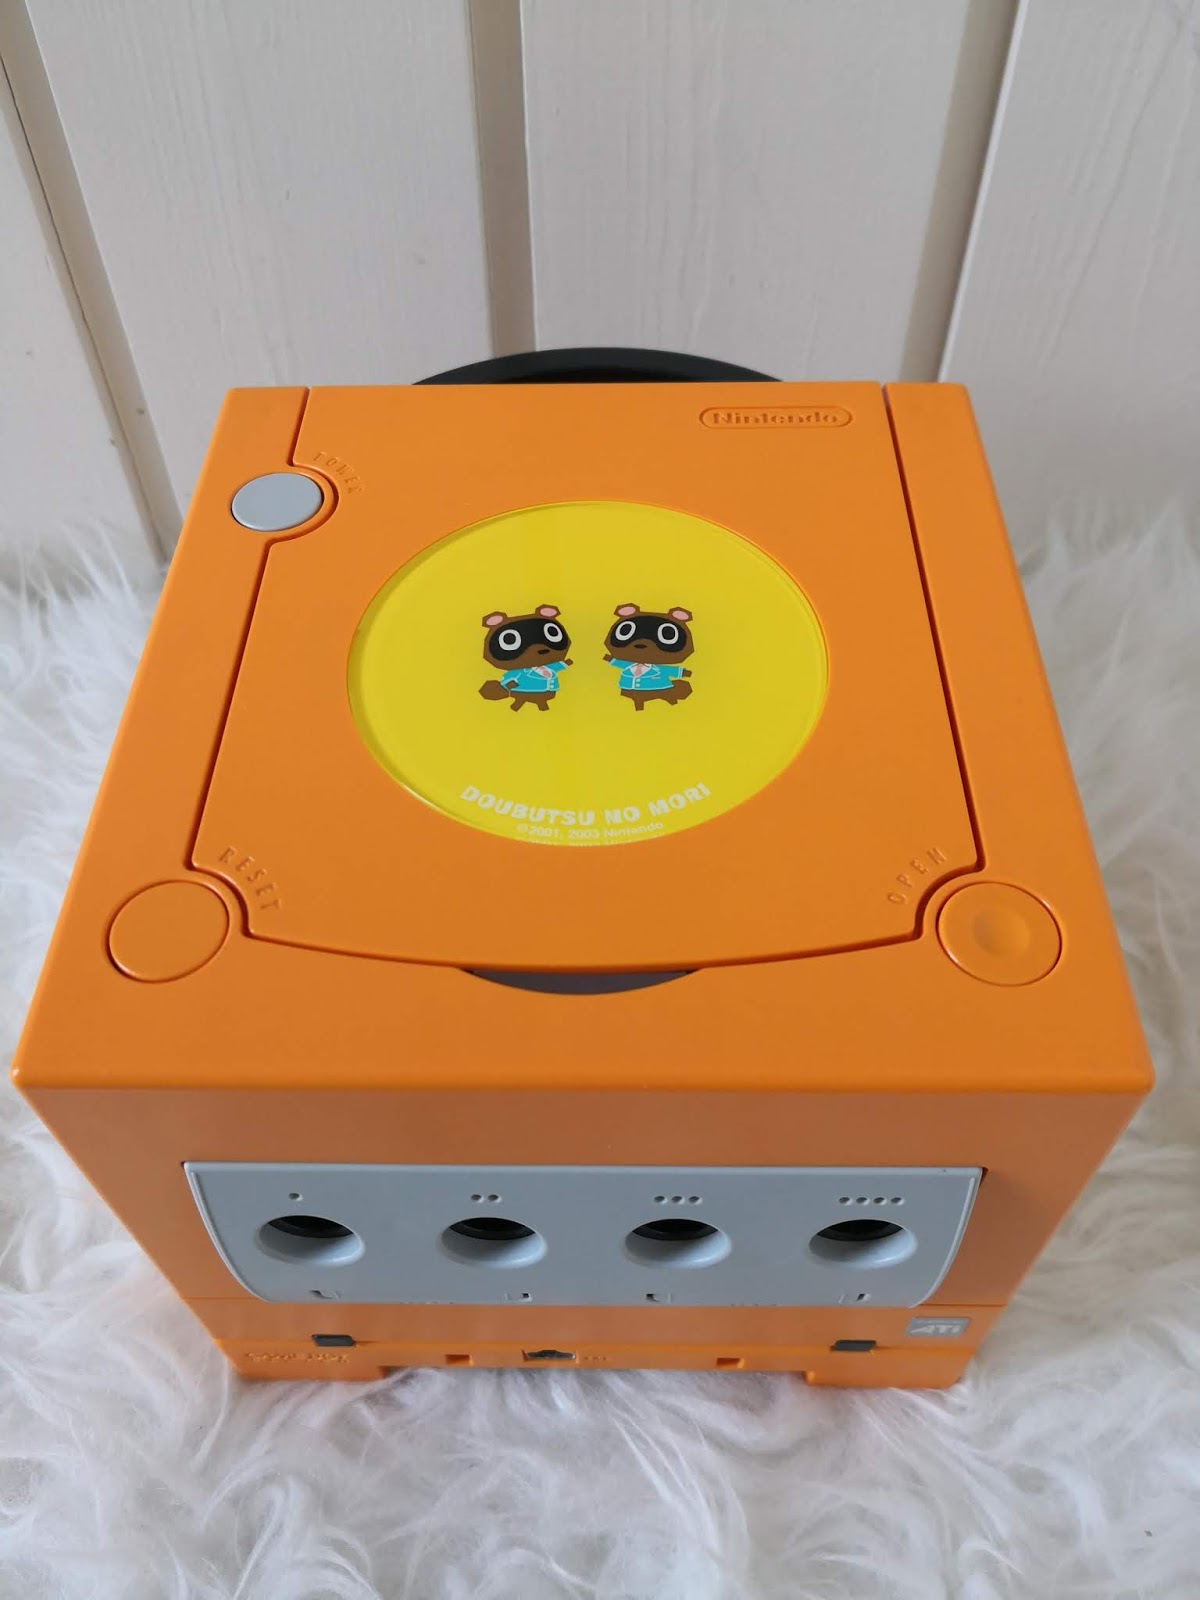 At sige sandheden energi Milestone The History of Limited Edition Animal Crossing Consoles